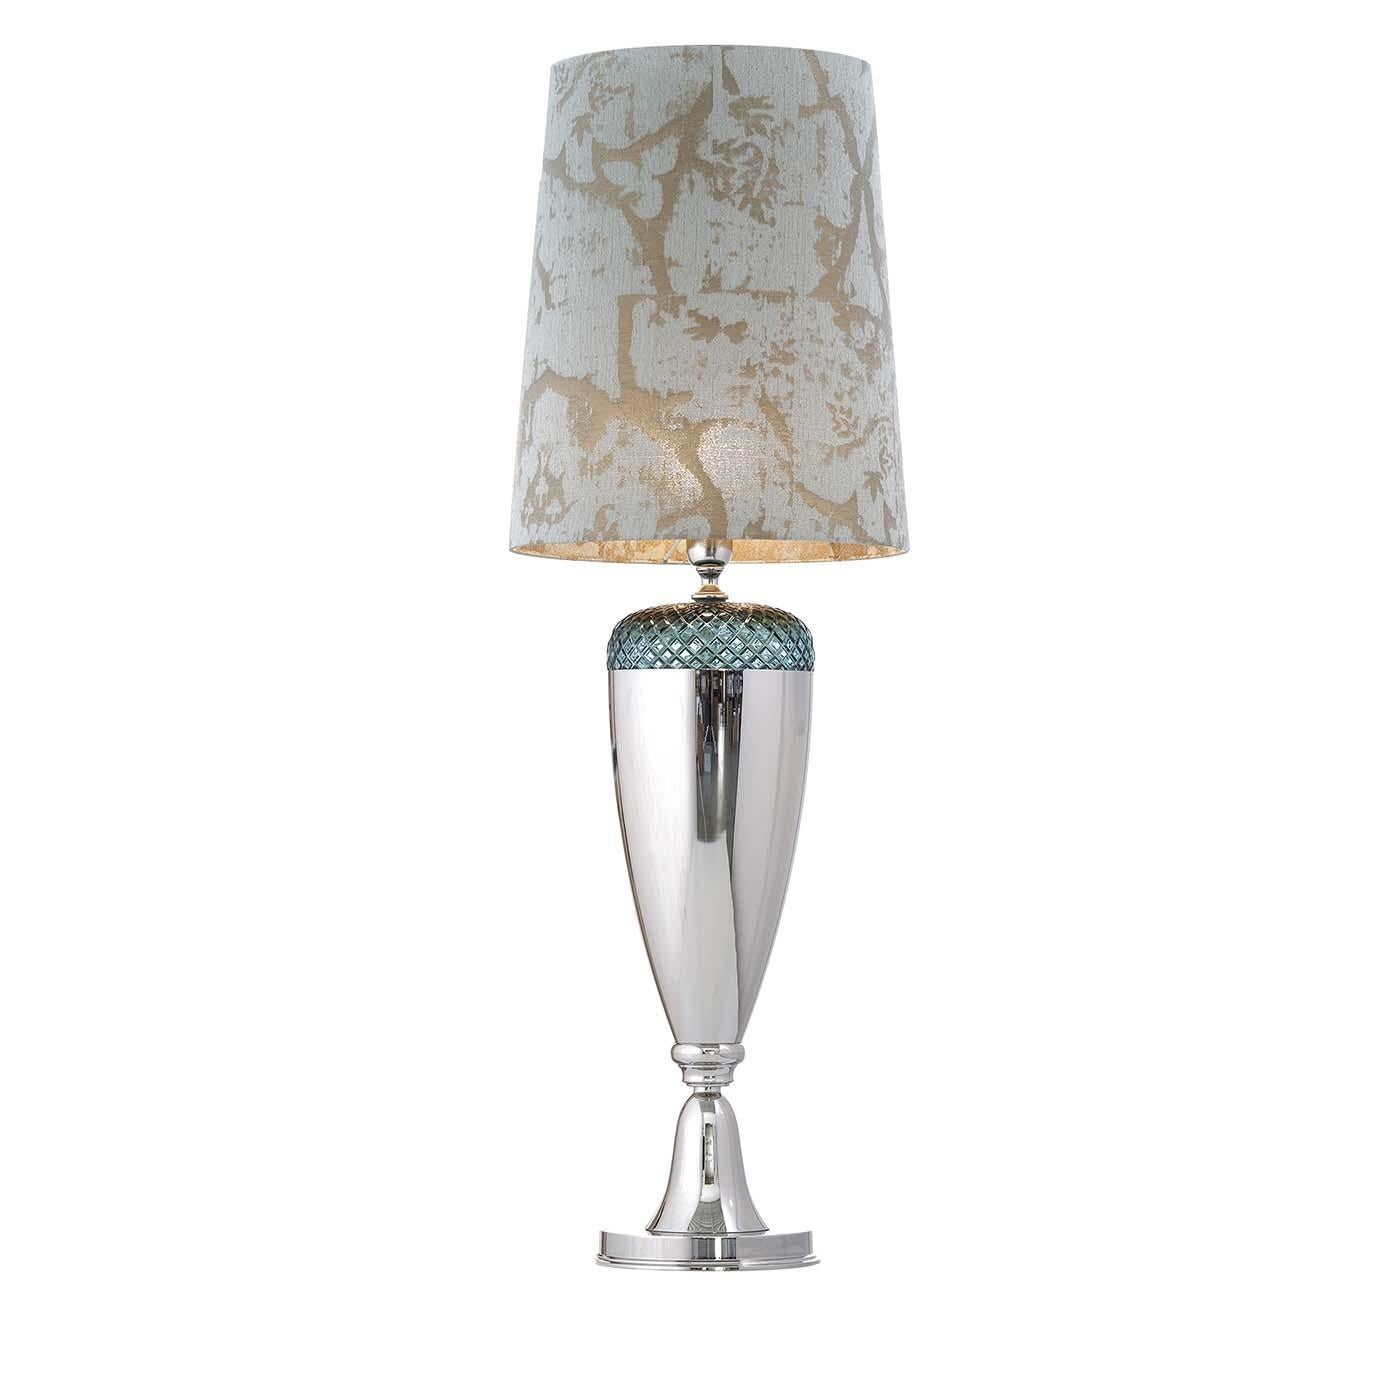 This stunning table lamp combines the smooth and glossy surface of a sinuous base in metal with its top, adorned with a superb handcut, 24 lead Italian crystal that boasts an aquamarine-green color and a geometric diamond-shaped texture. The shade's